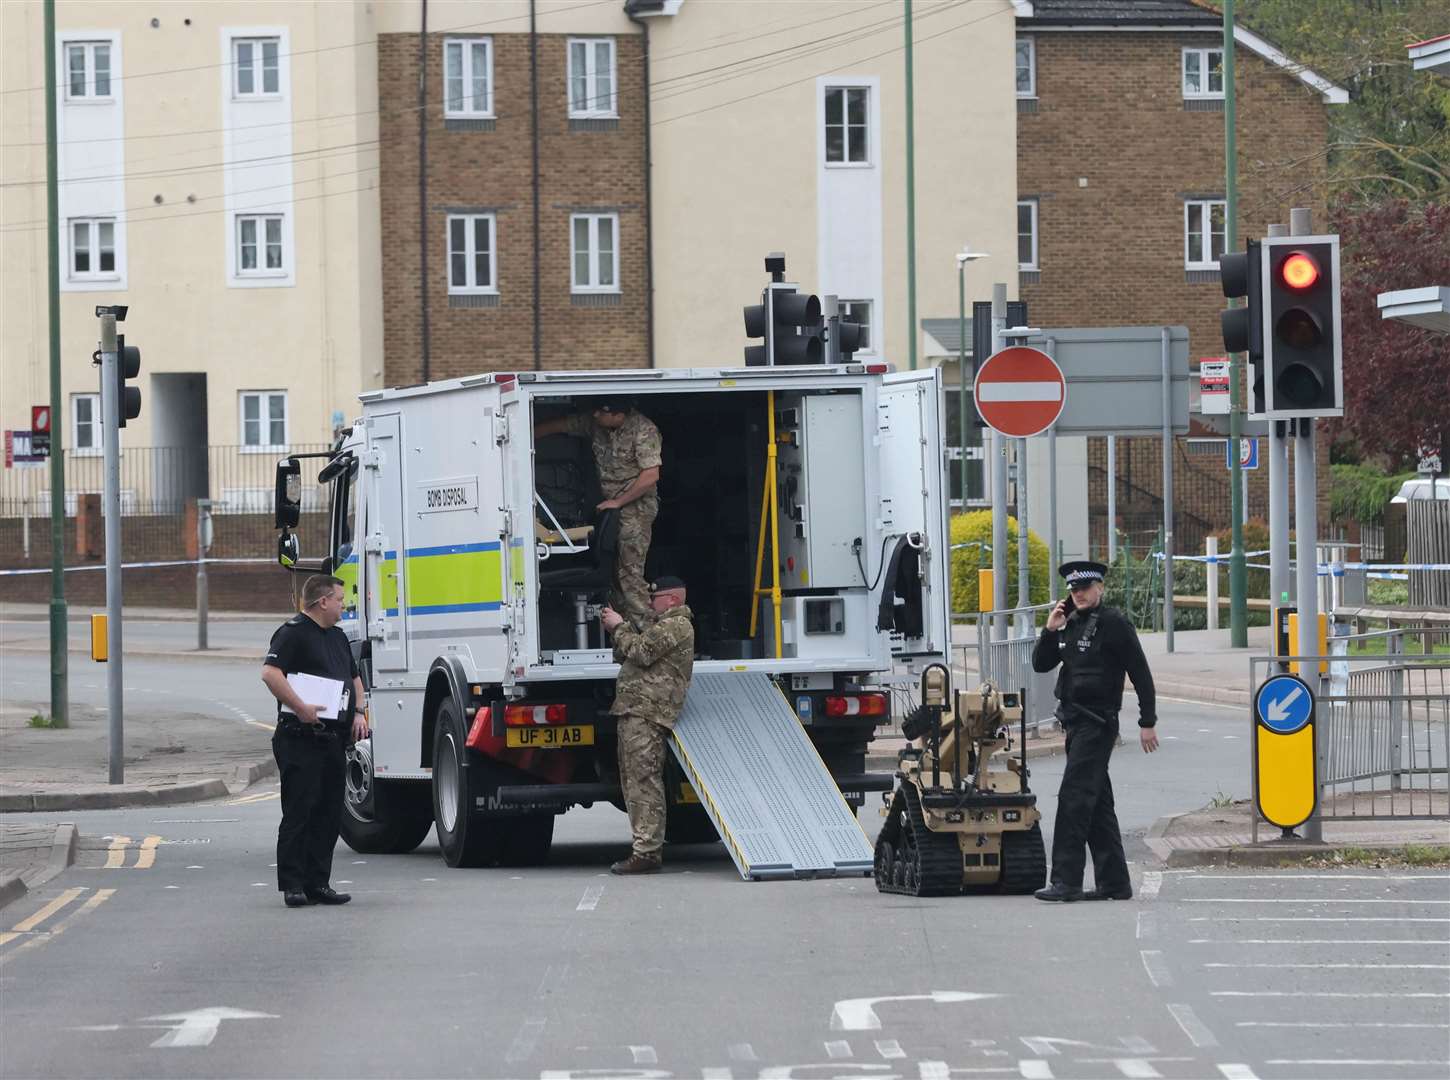 A bomb disposal unit was called to Prospect Place, Dartford. Photo: UKNIP